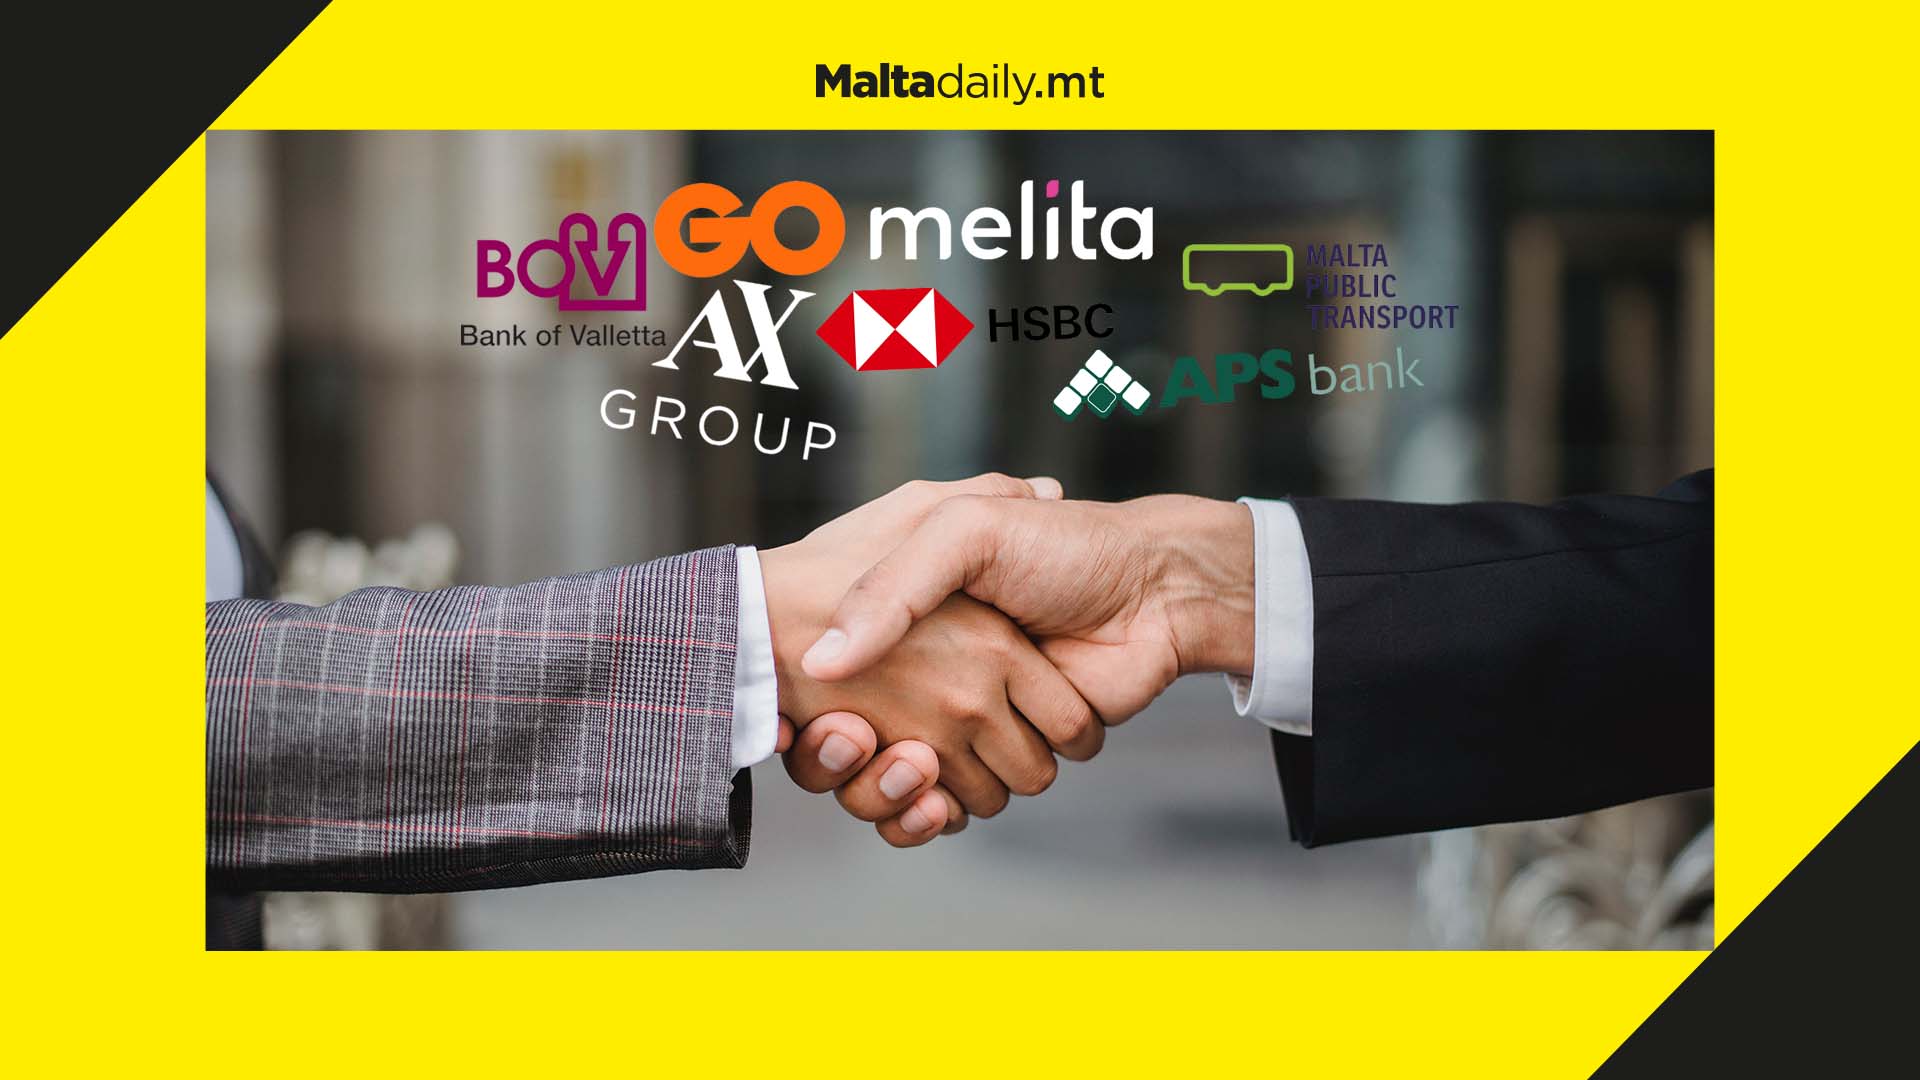 13 of Malta's biggest businesses have joined forces to fight for carbon neutrality